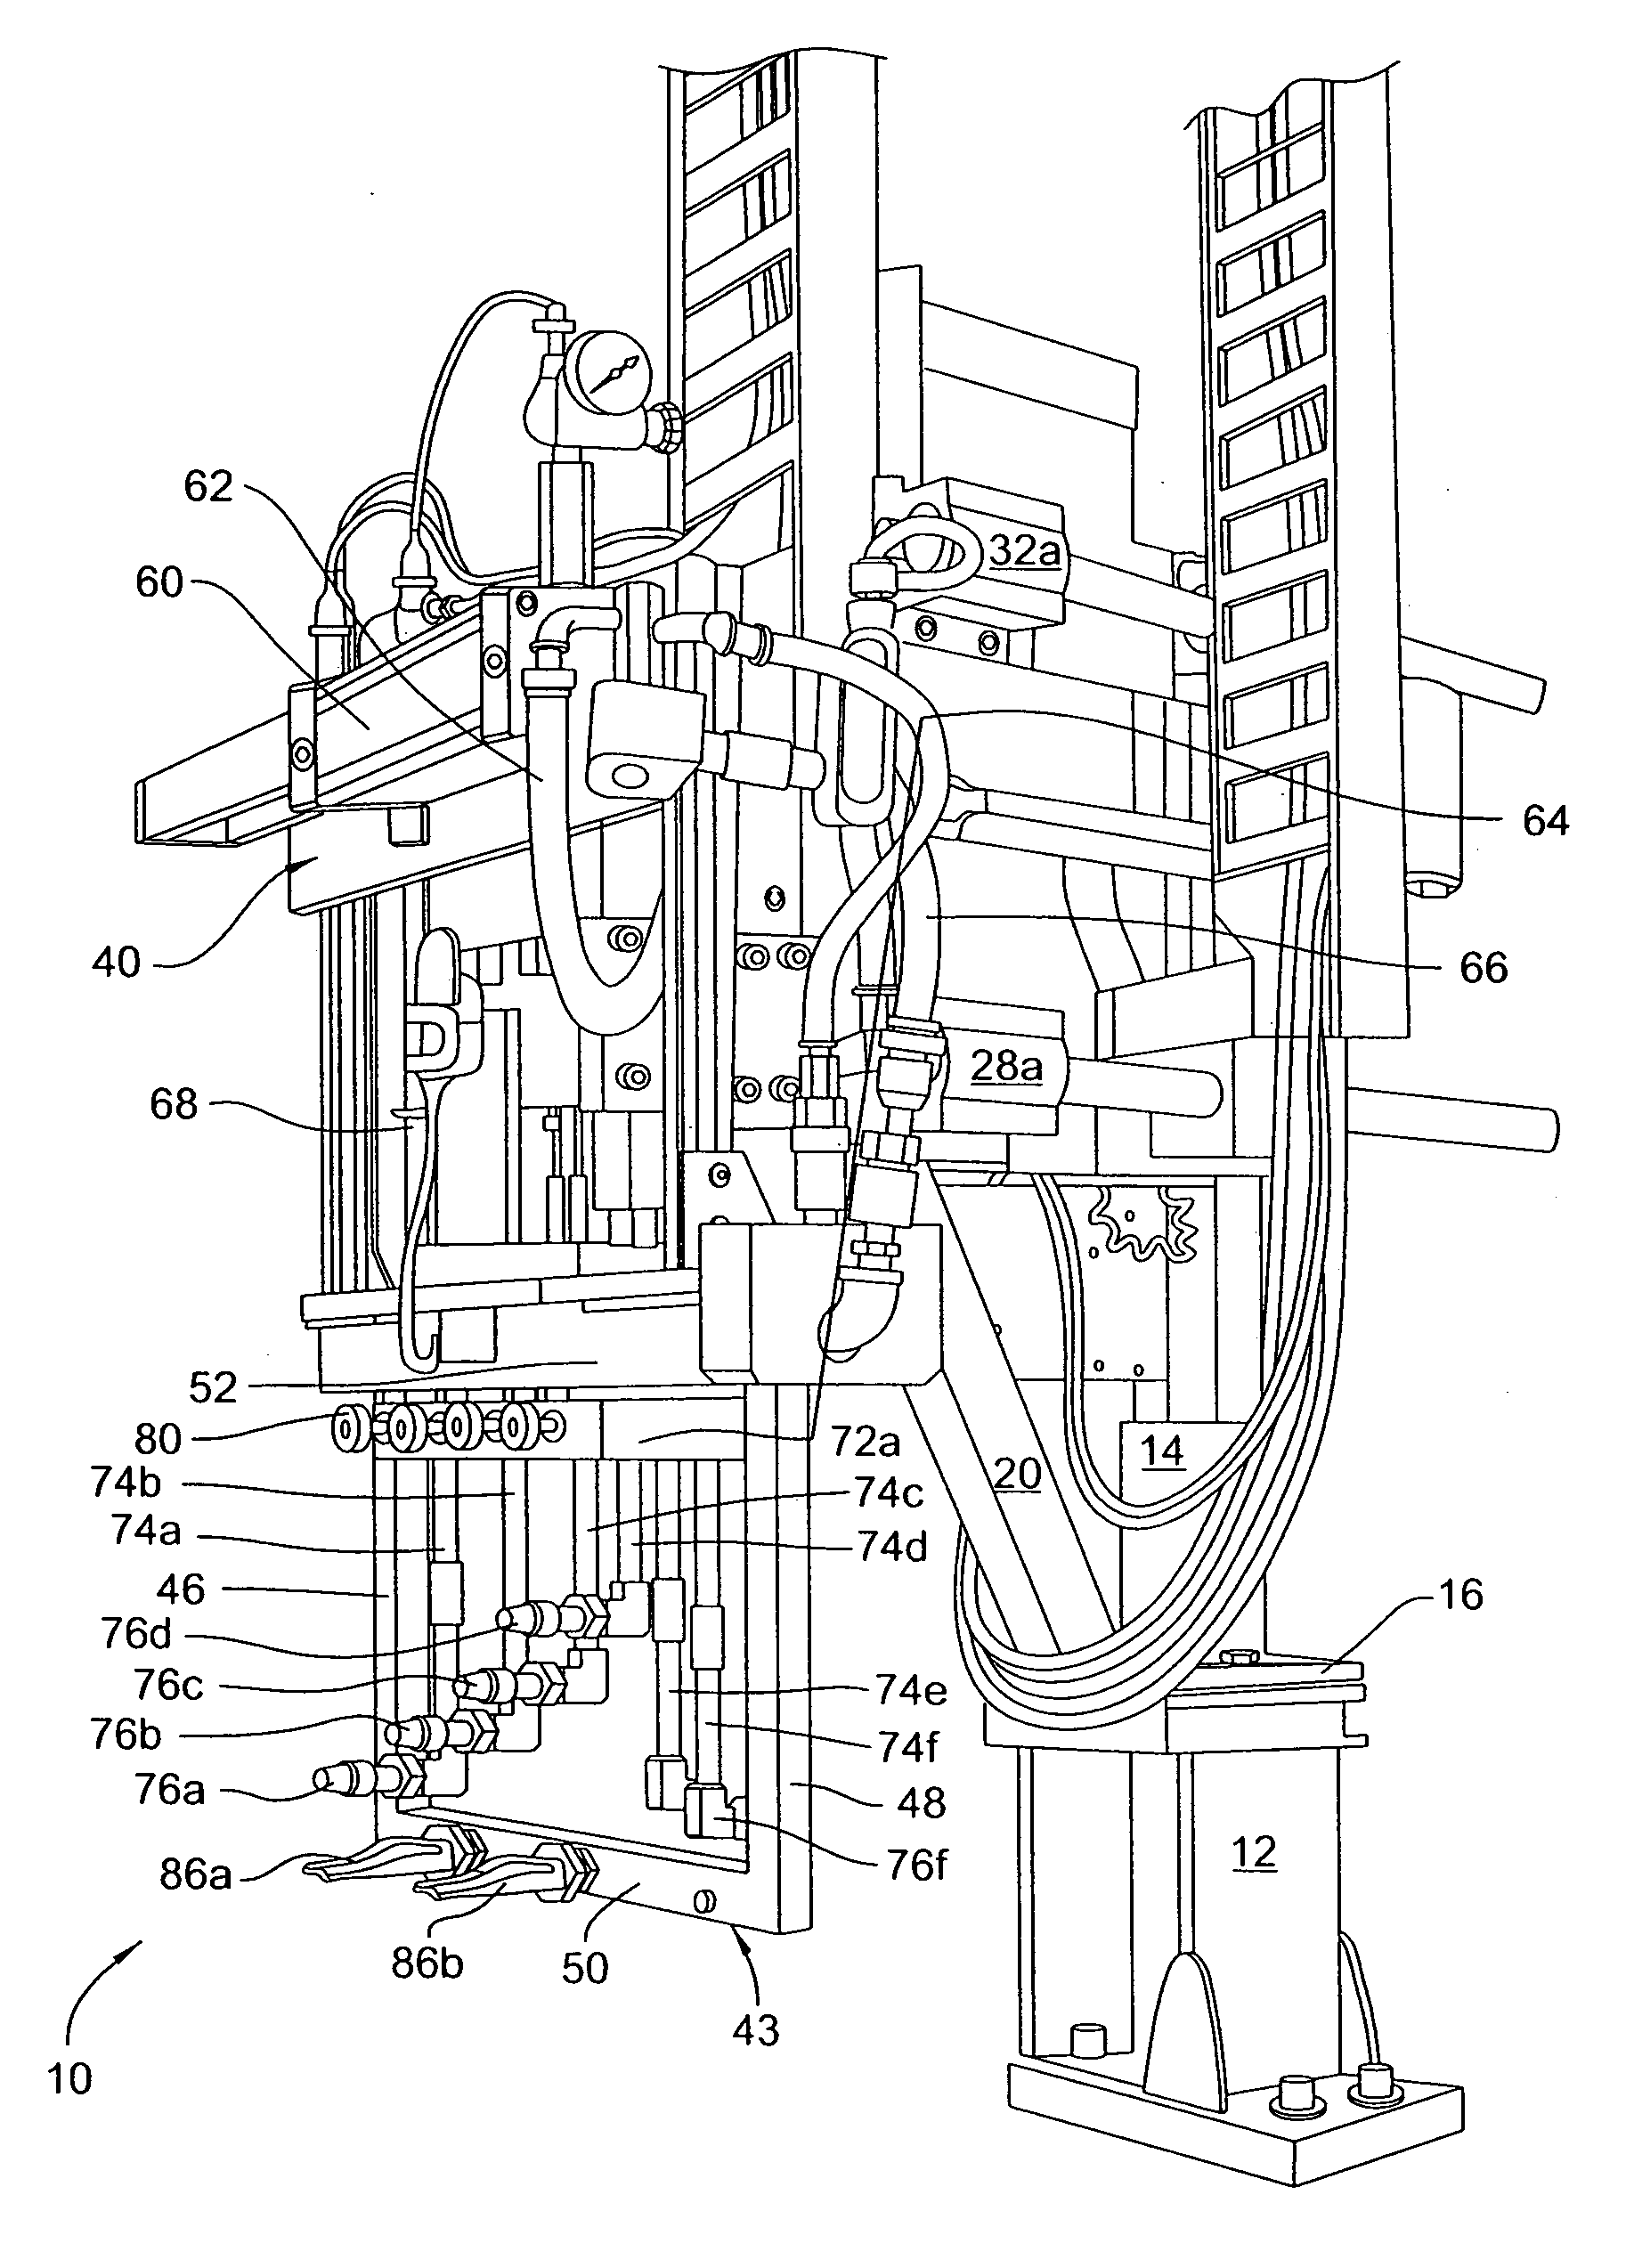 Spray system having a dosing device for a molding process